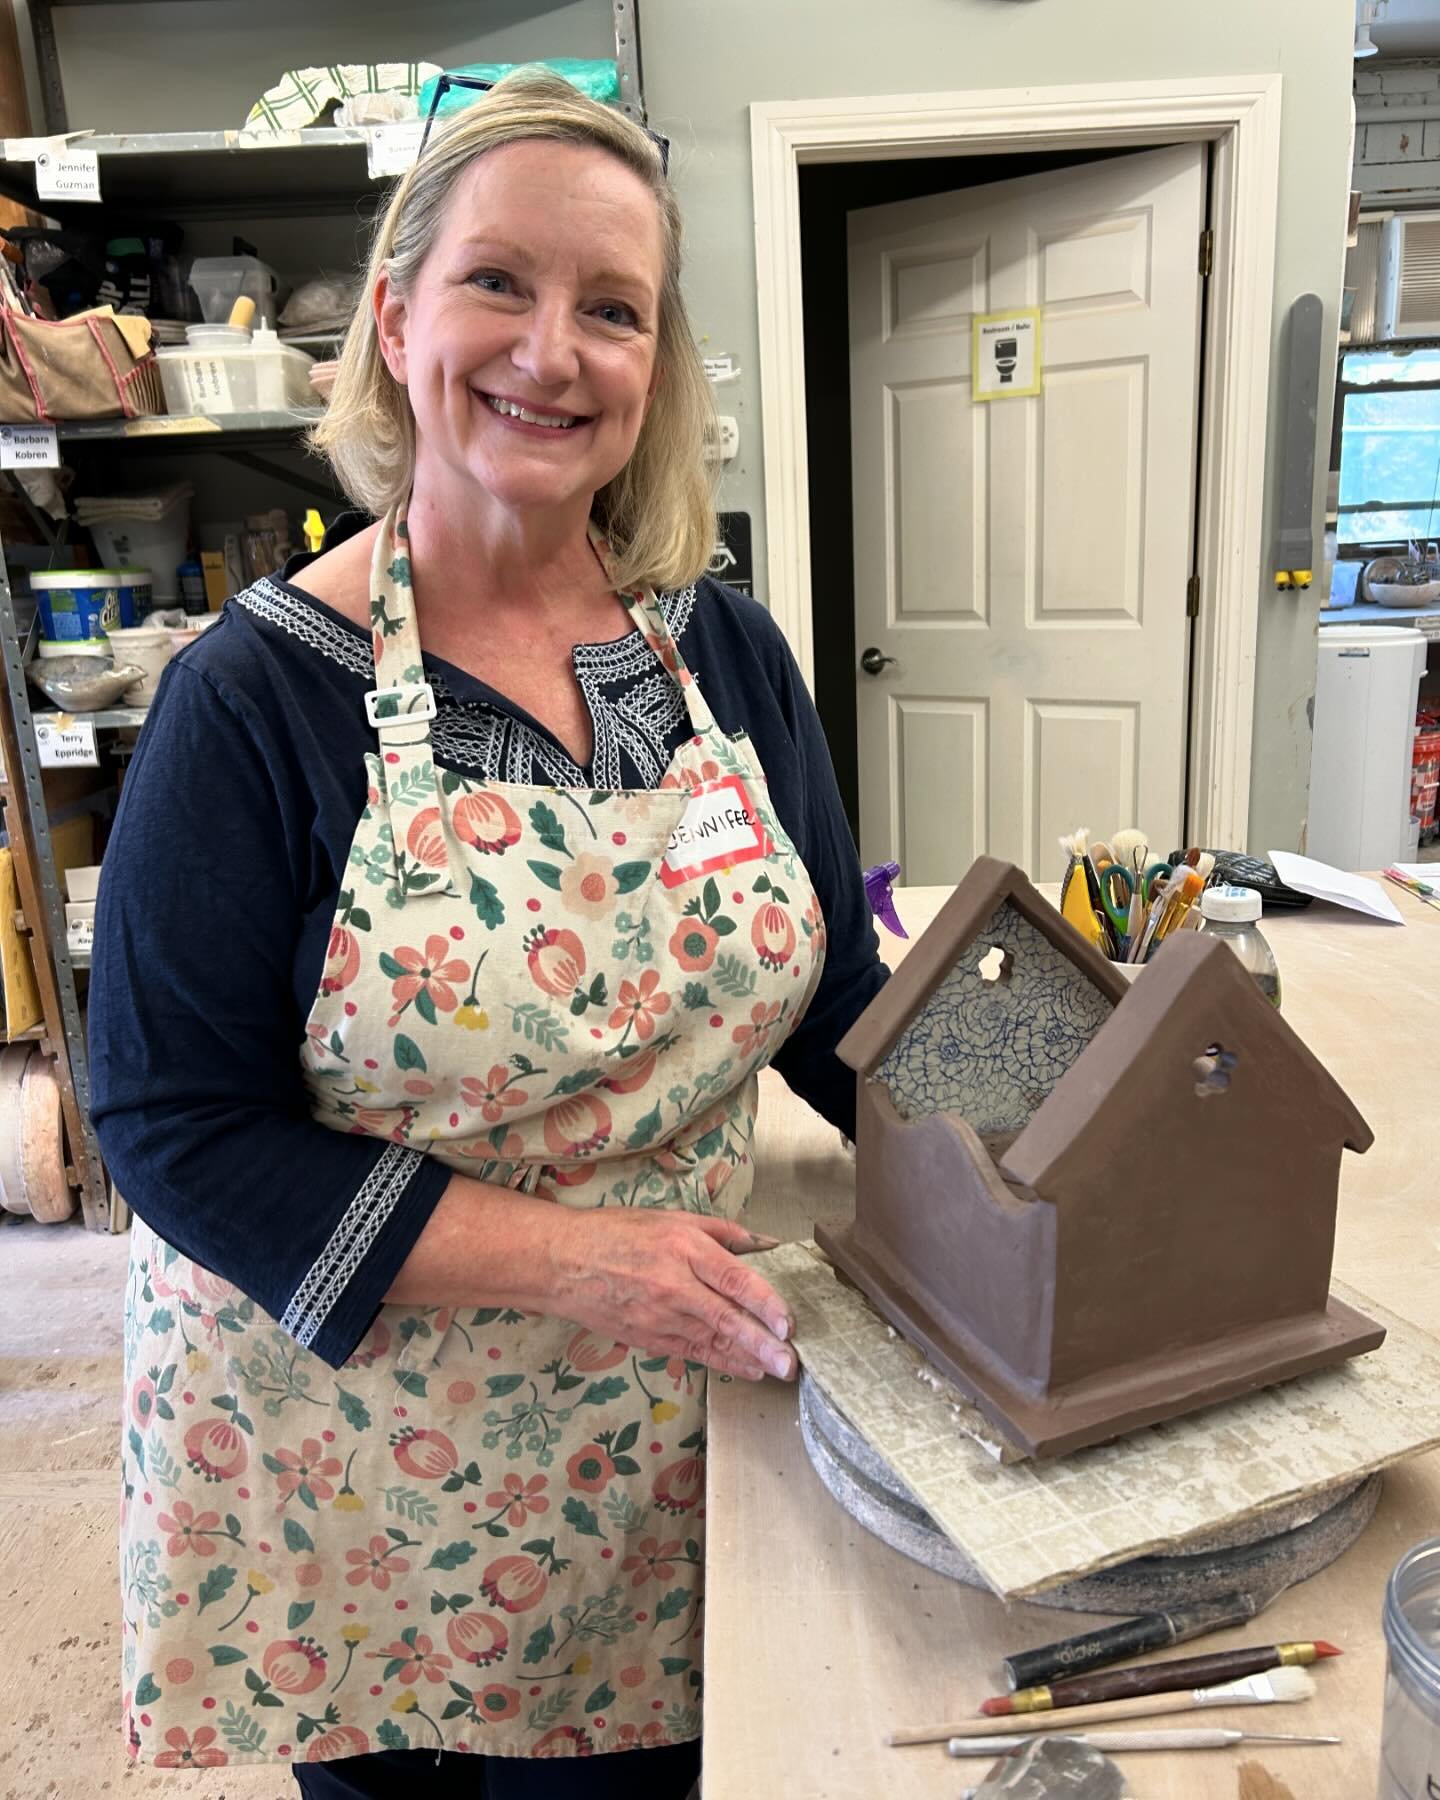 Clay Art Center Spring Session B Classes begins Sunday, May 5. Develop your clay skills with experienced instructors in one of the many classes available for all levels. Register now and start your creative journey!

Handbuilding For Beginners with S